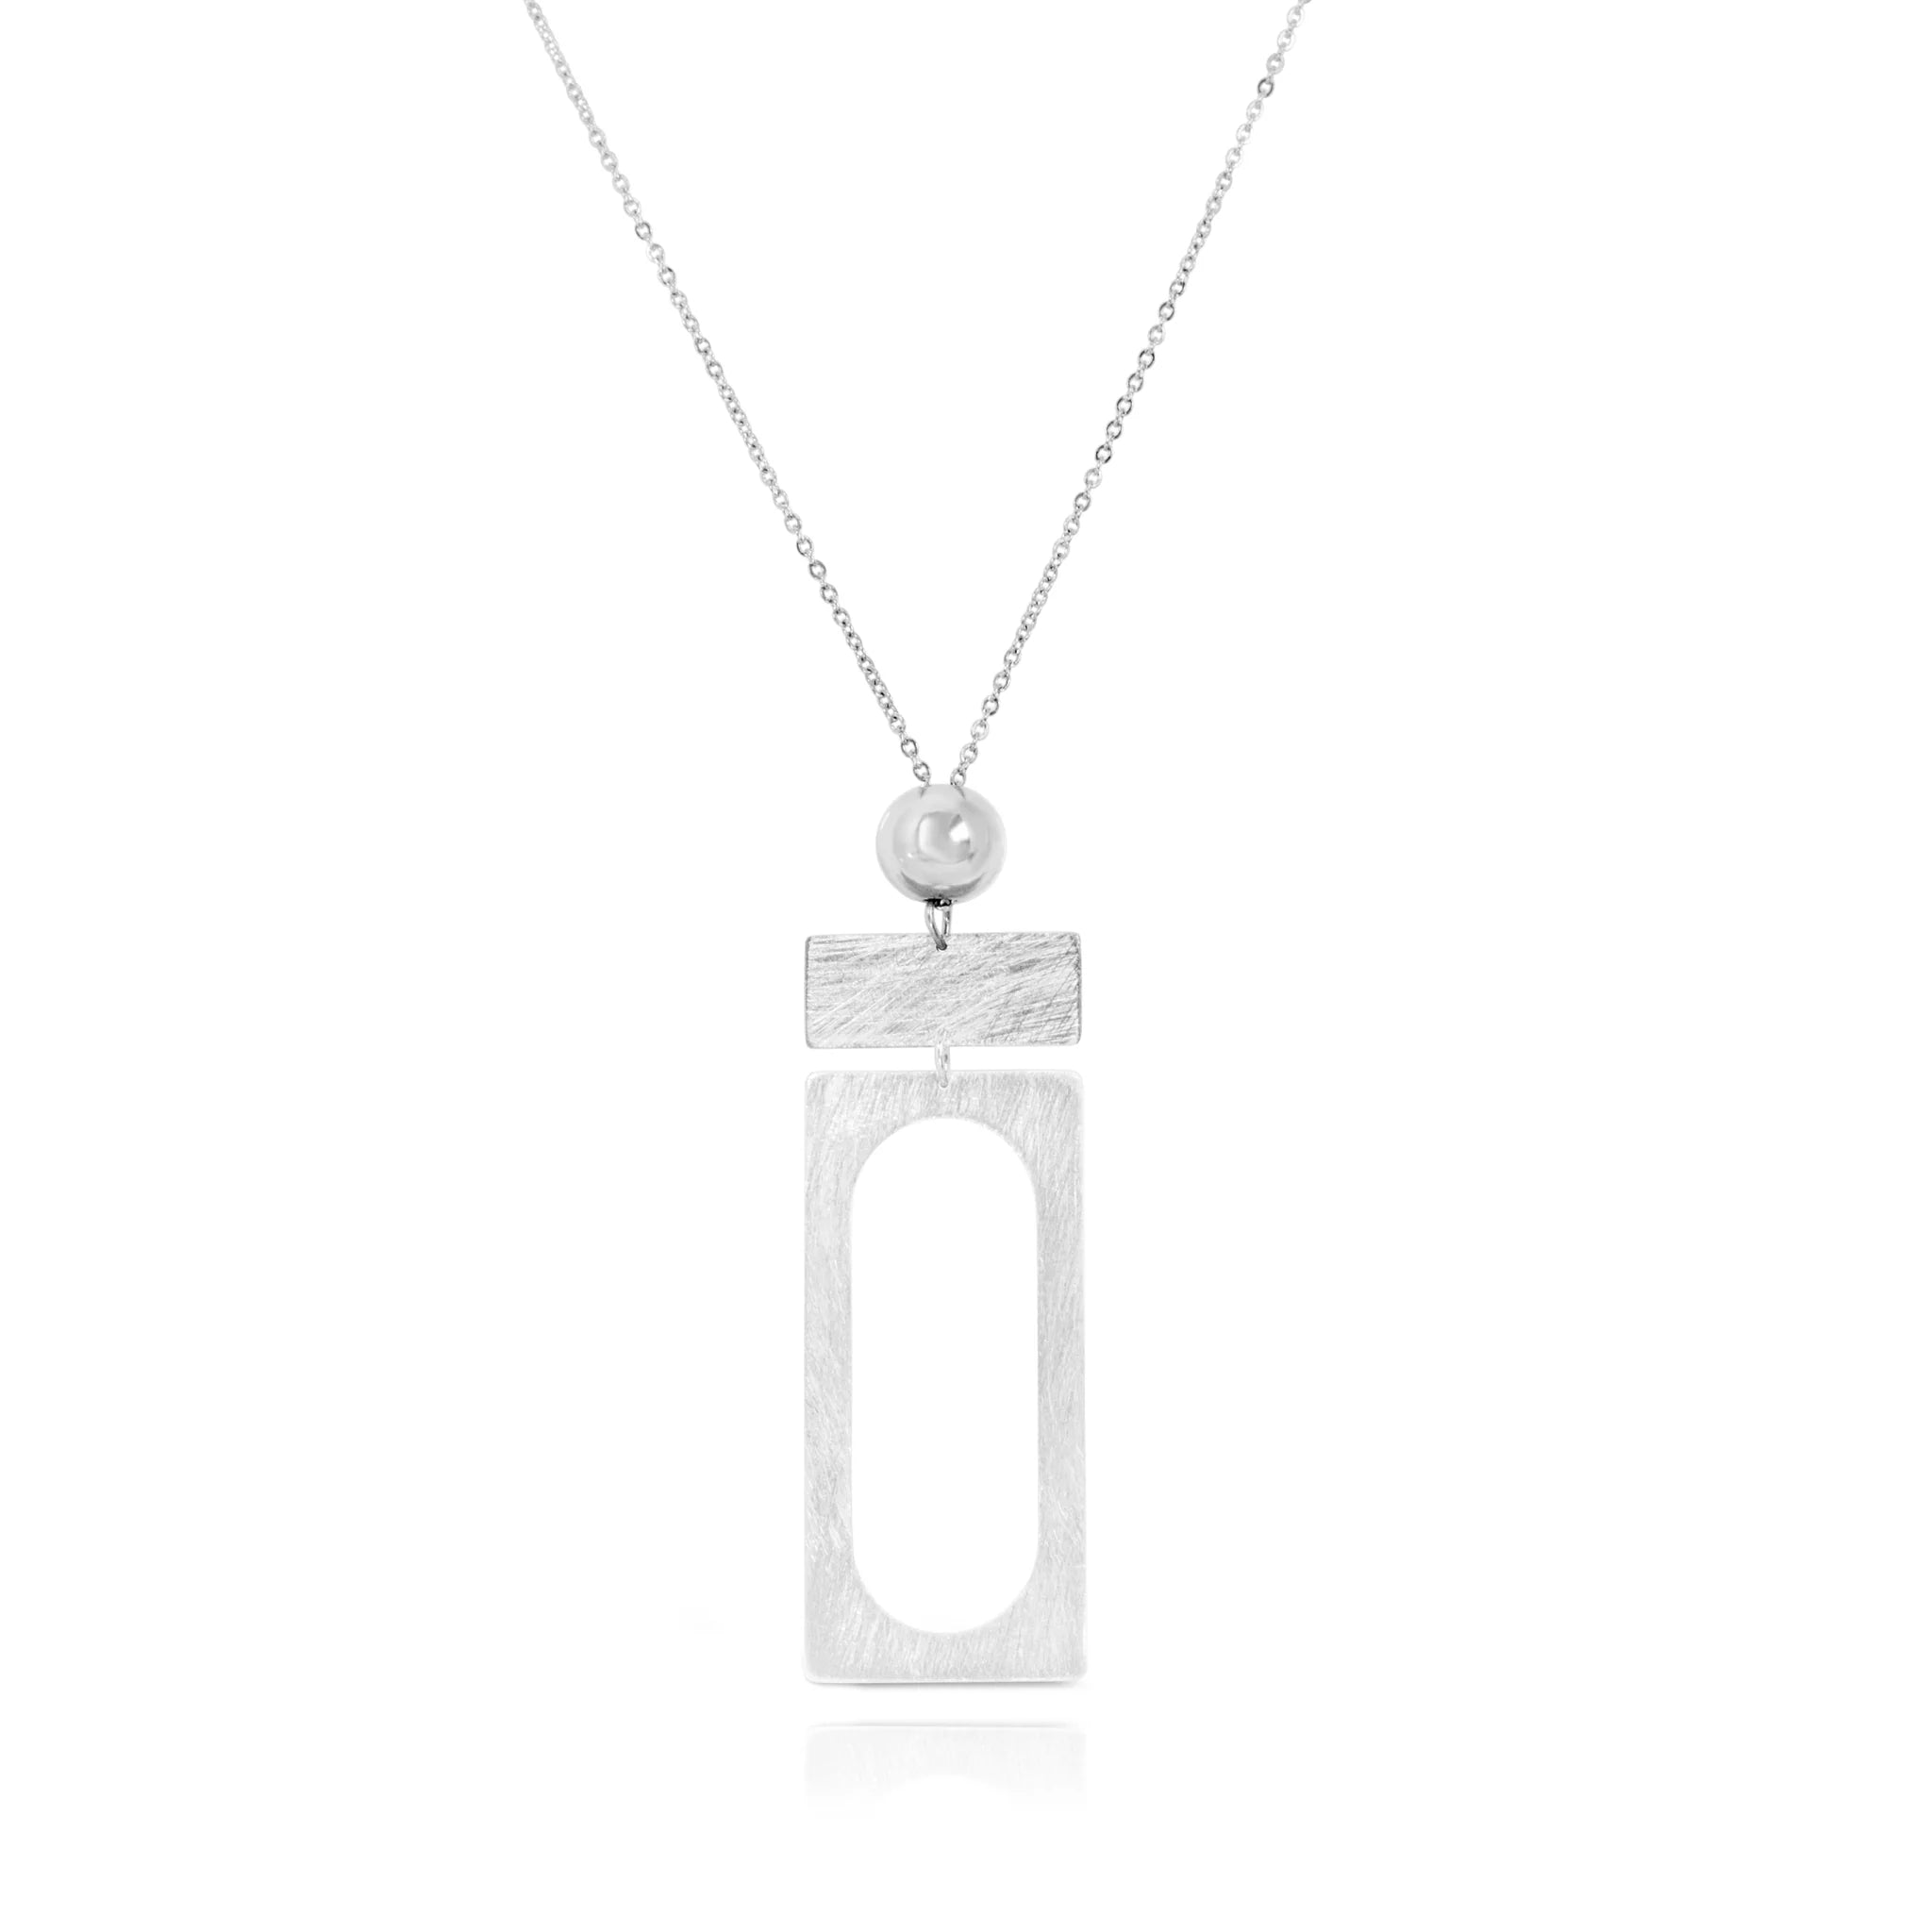 CARRE SILVER NECKLACE